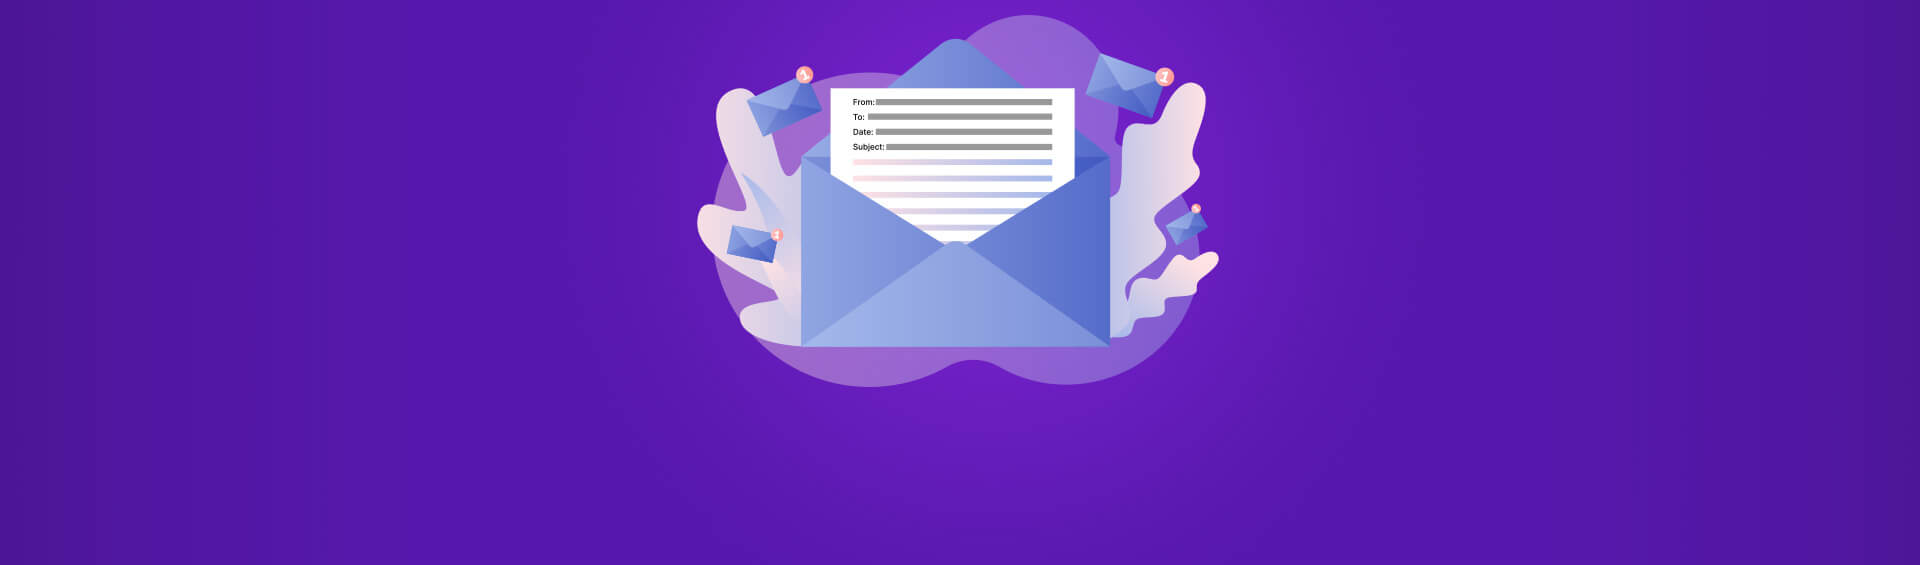 Interpreting Email Headers: How to Check Email Headers And Why They Matter